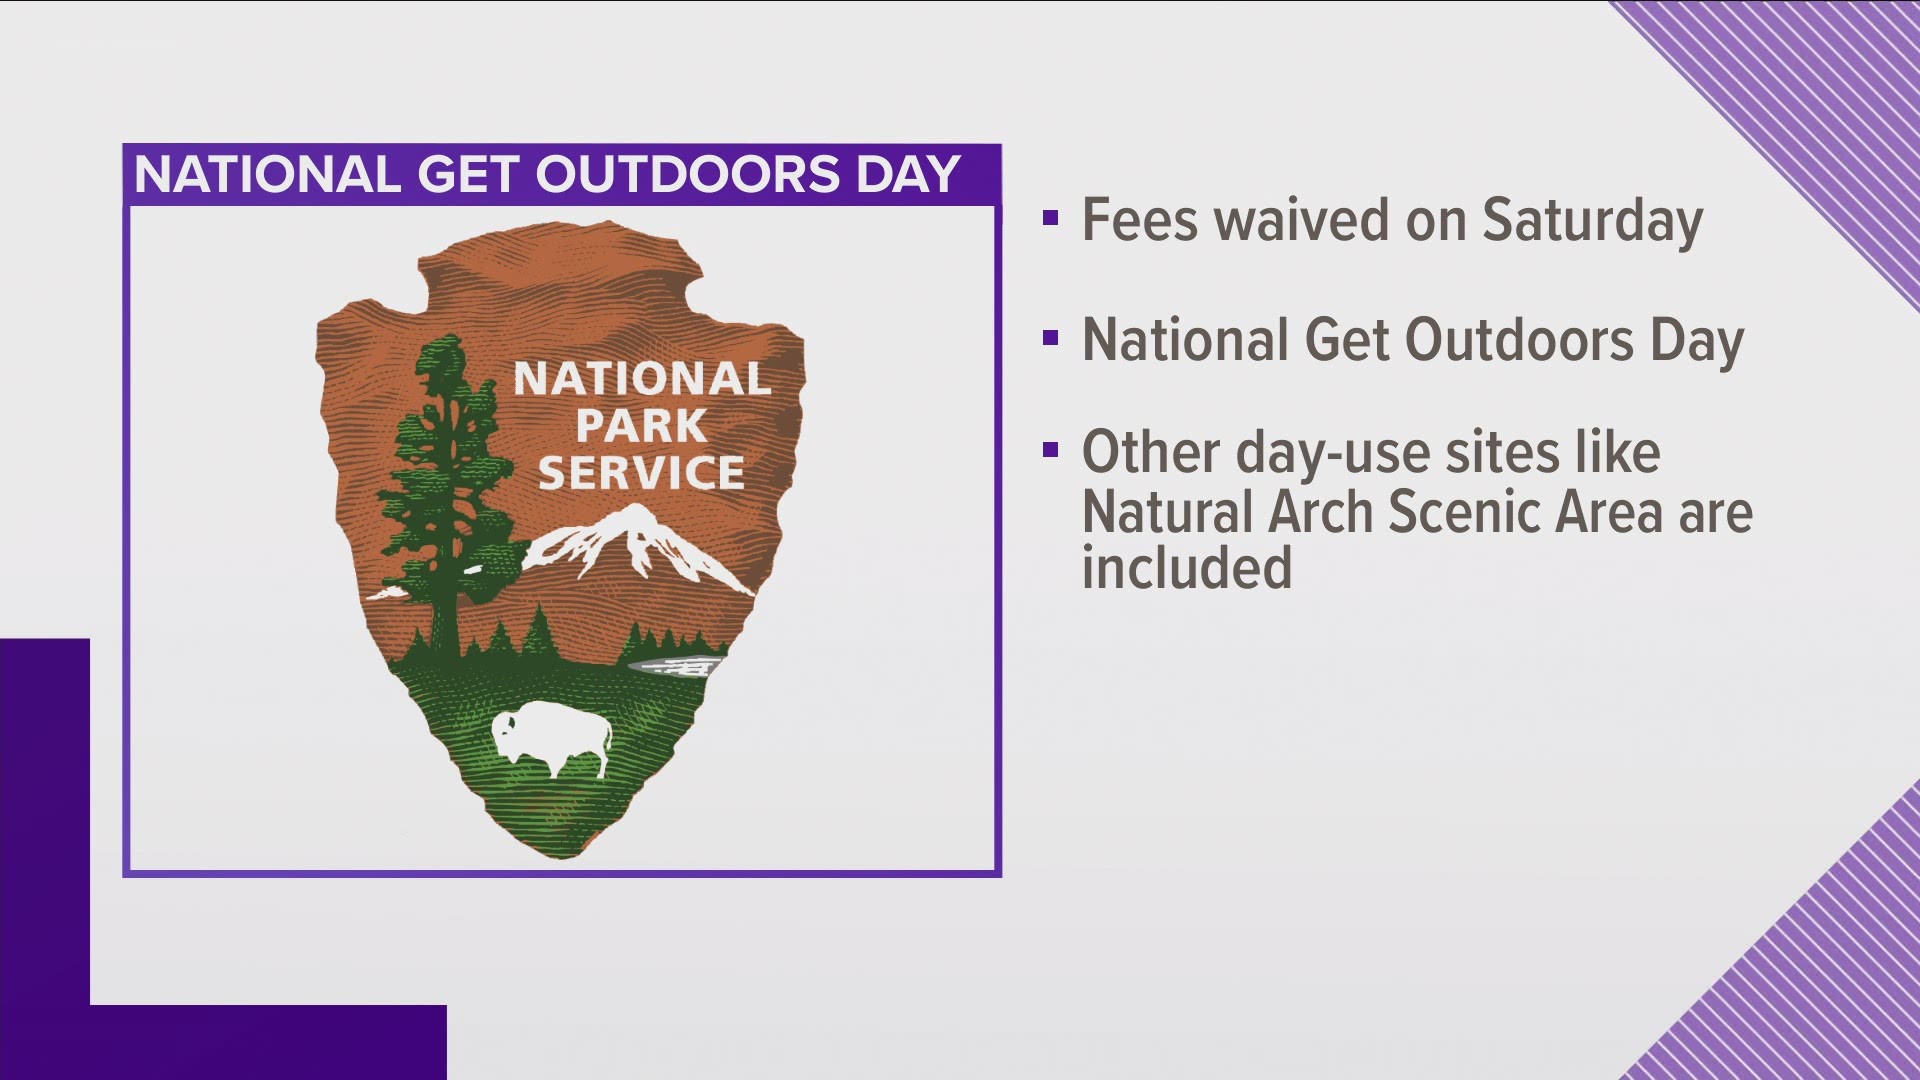 The forest said the waived fees are meant to celebrate National Get Outdoors Day.